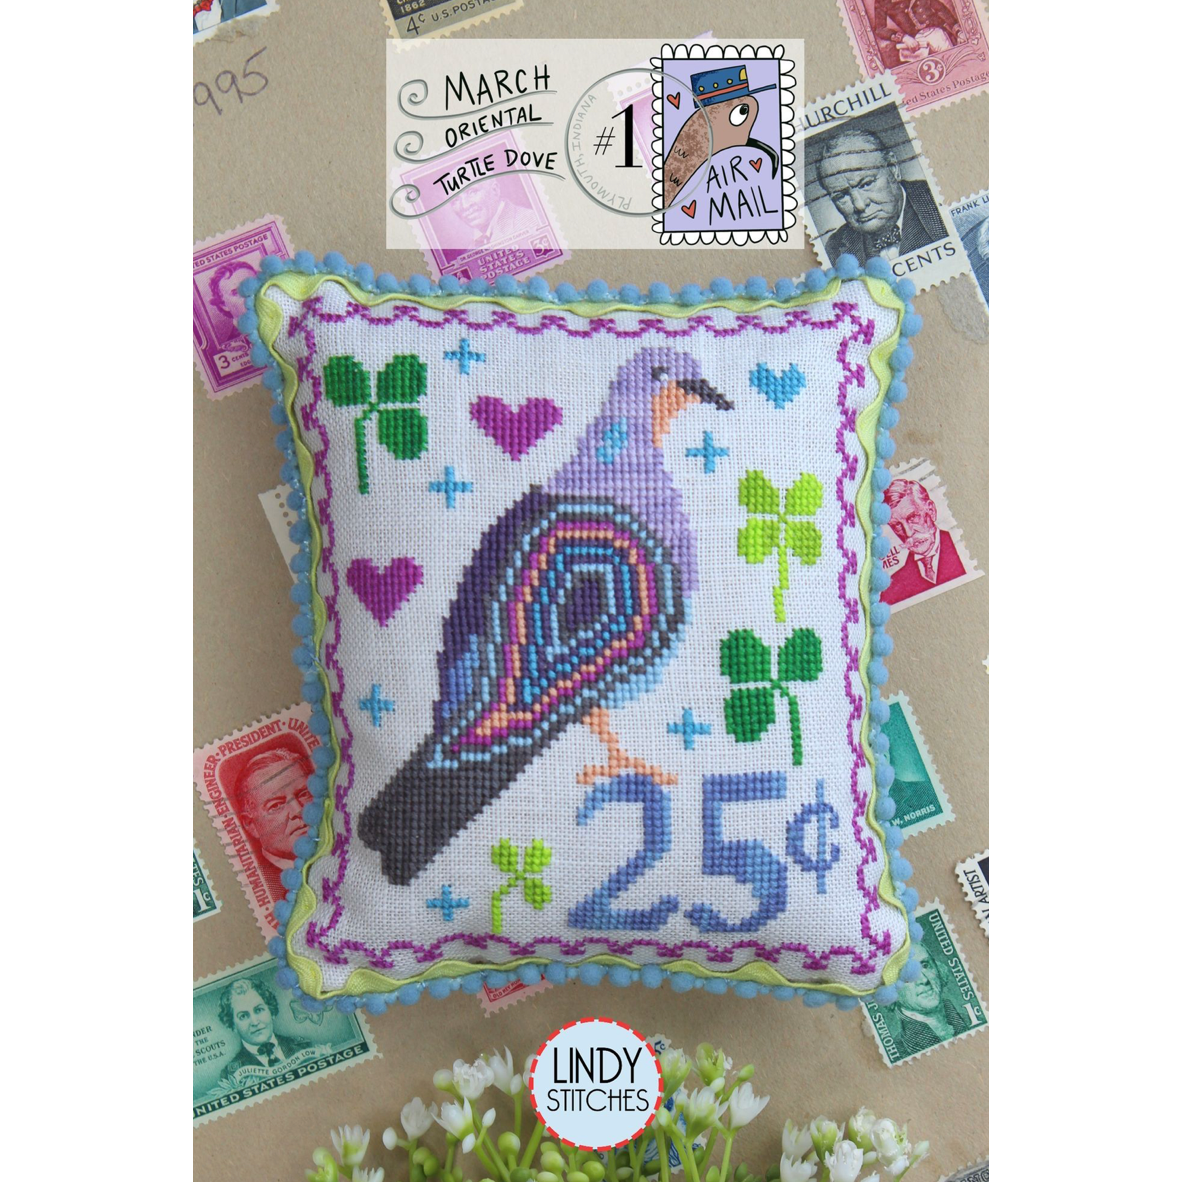 Lindy Stitches ~ Airmail March - Oriental Turtle Dove